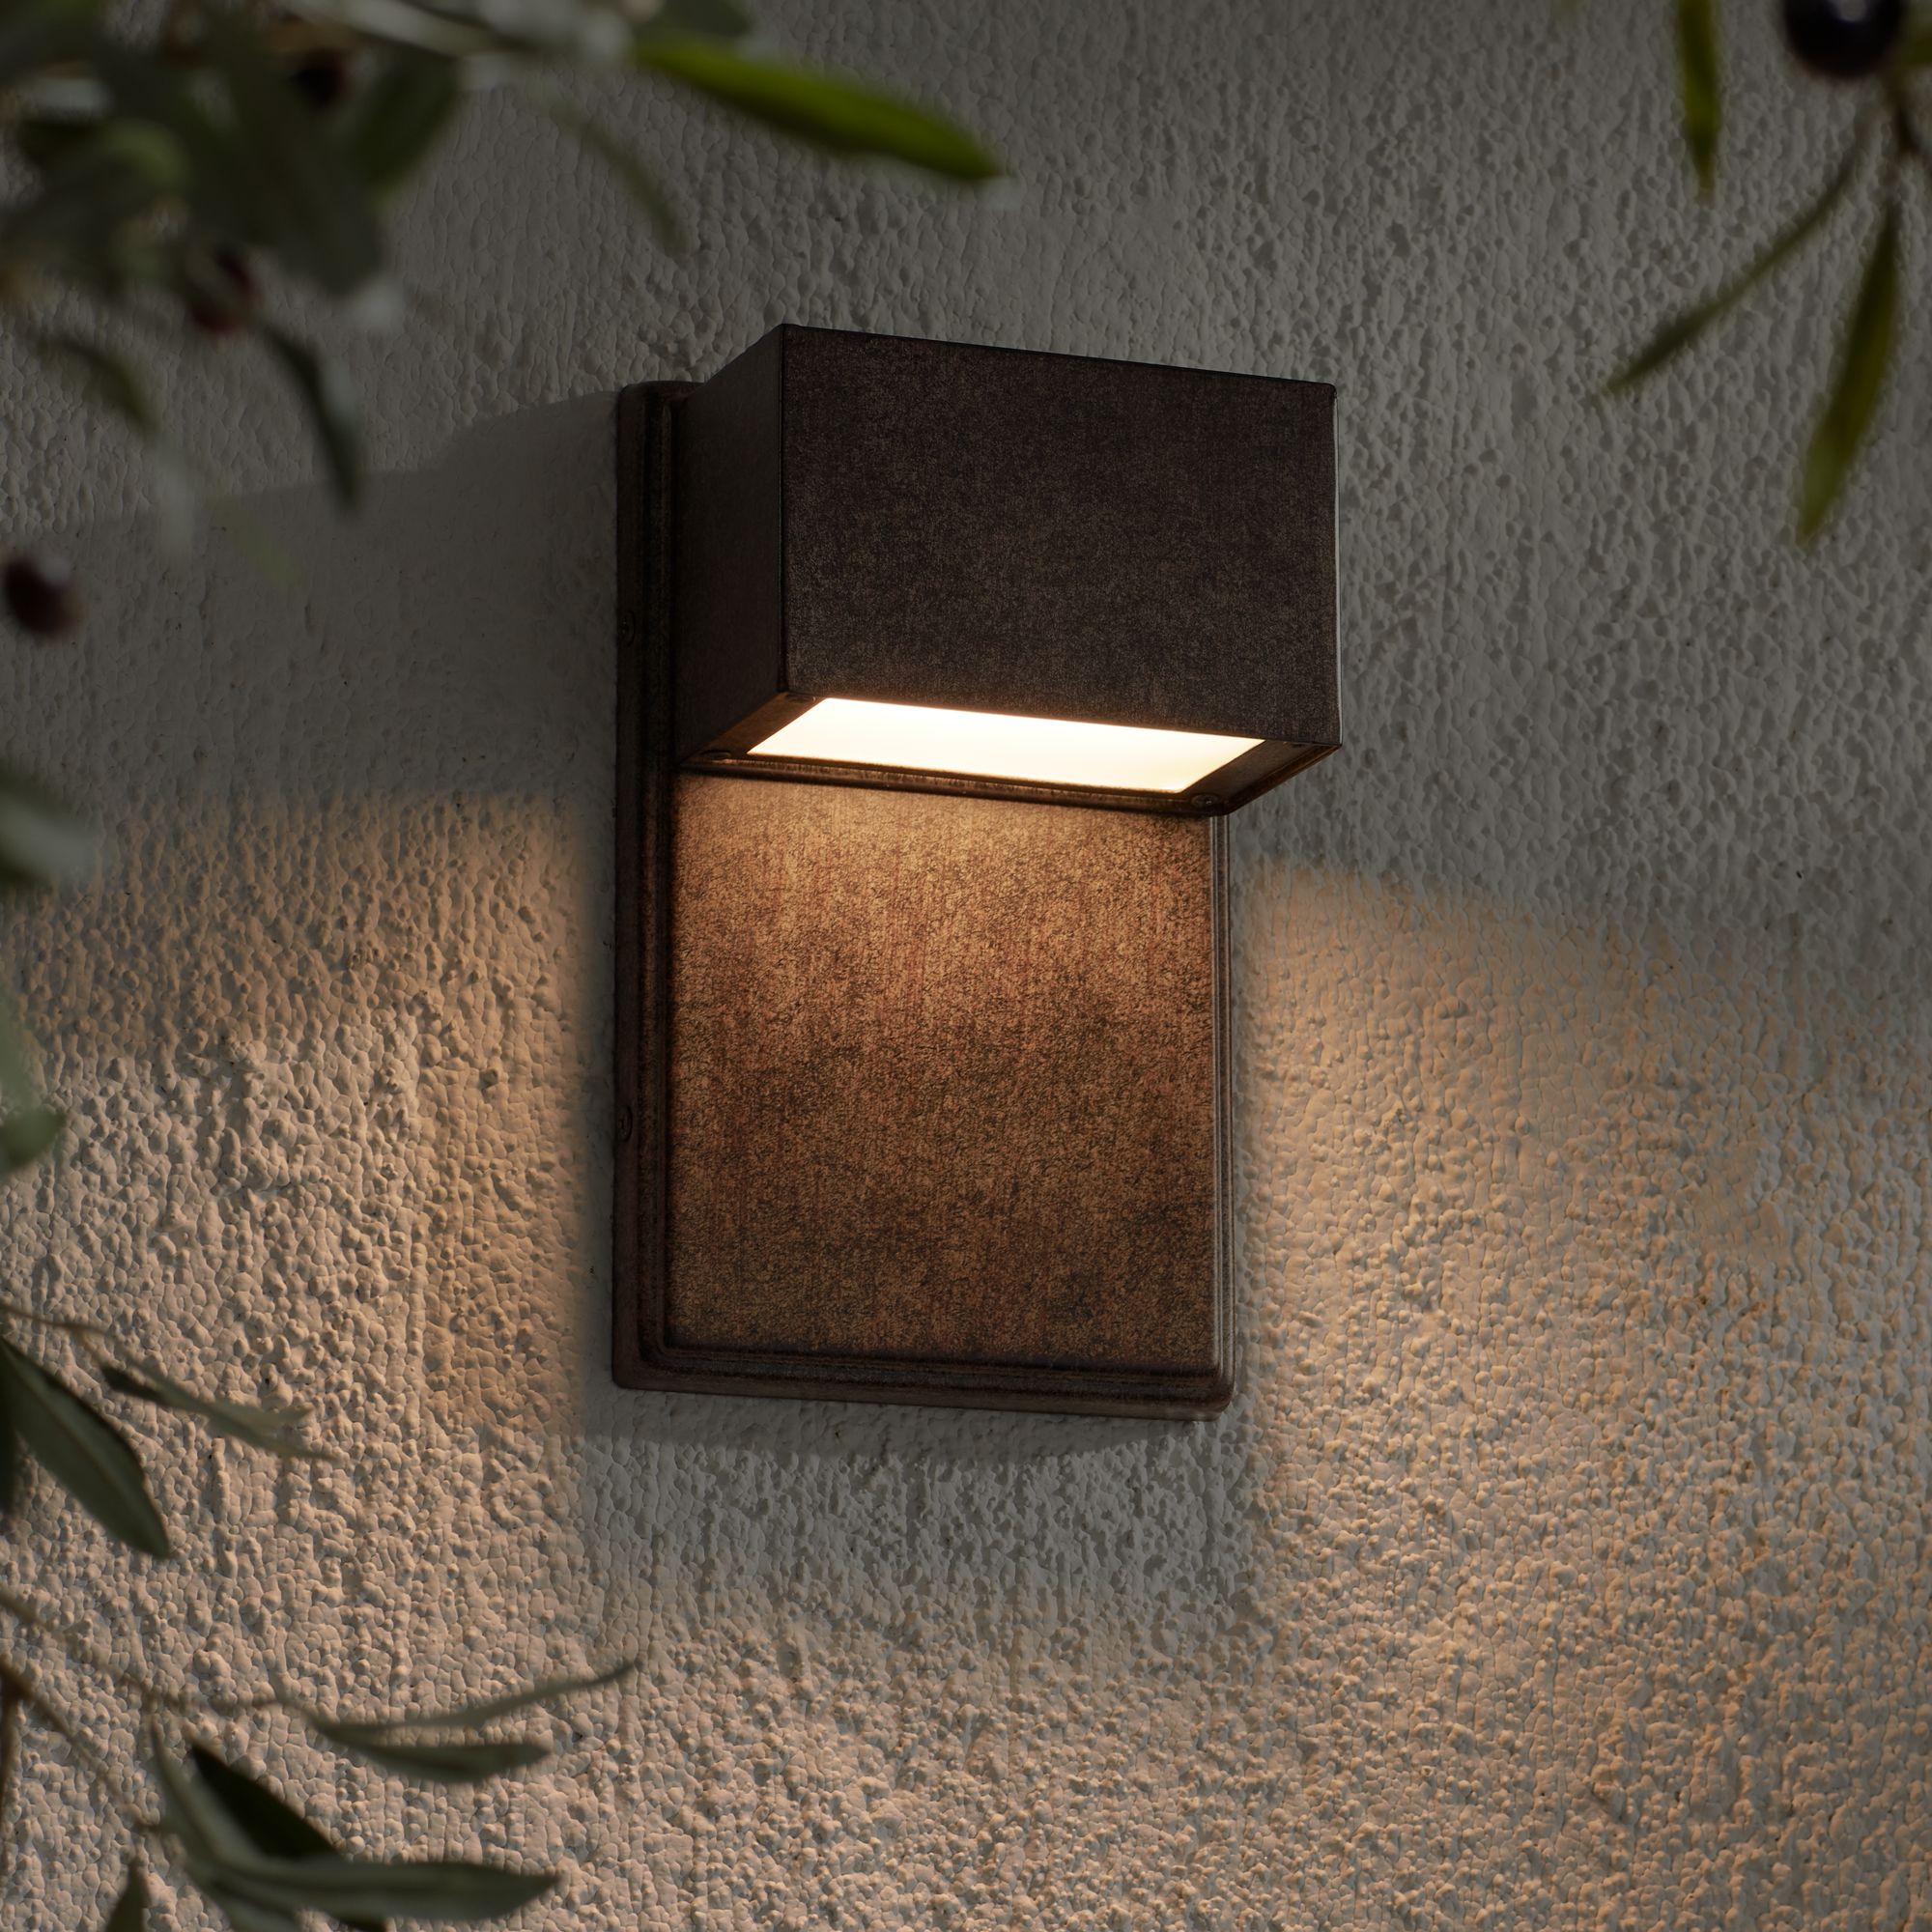 Possini Euro Design Modern Outdoor Wall Light Fixture LED Bronze Black Box 8" Frosted Lens Downlight for Exterior House Porch Patio - image 4 of 7